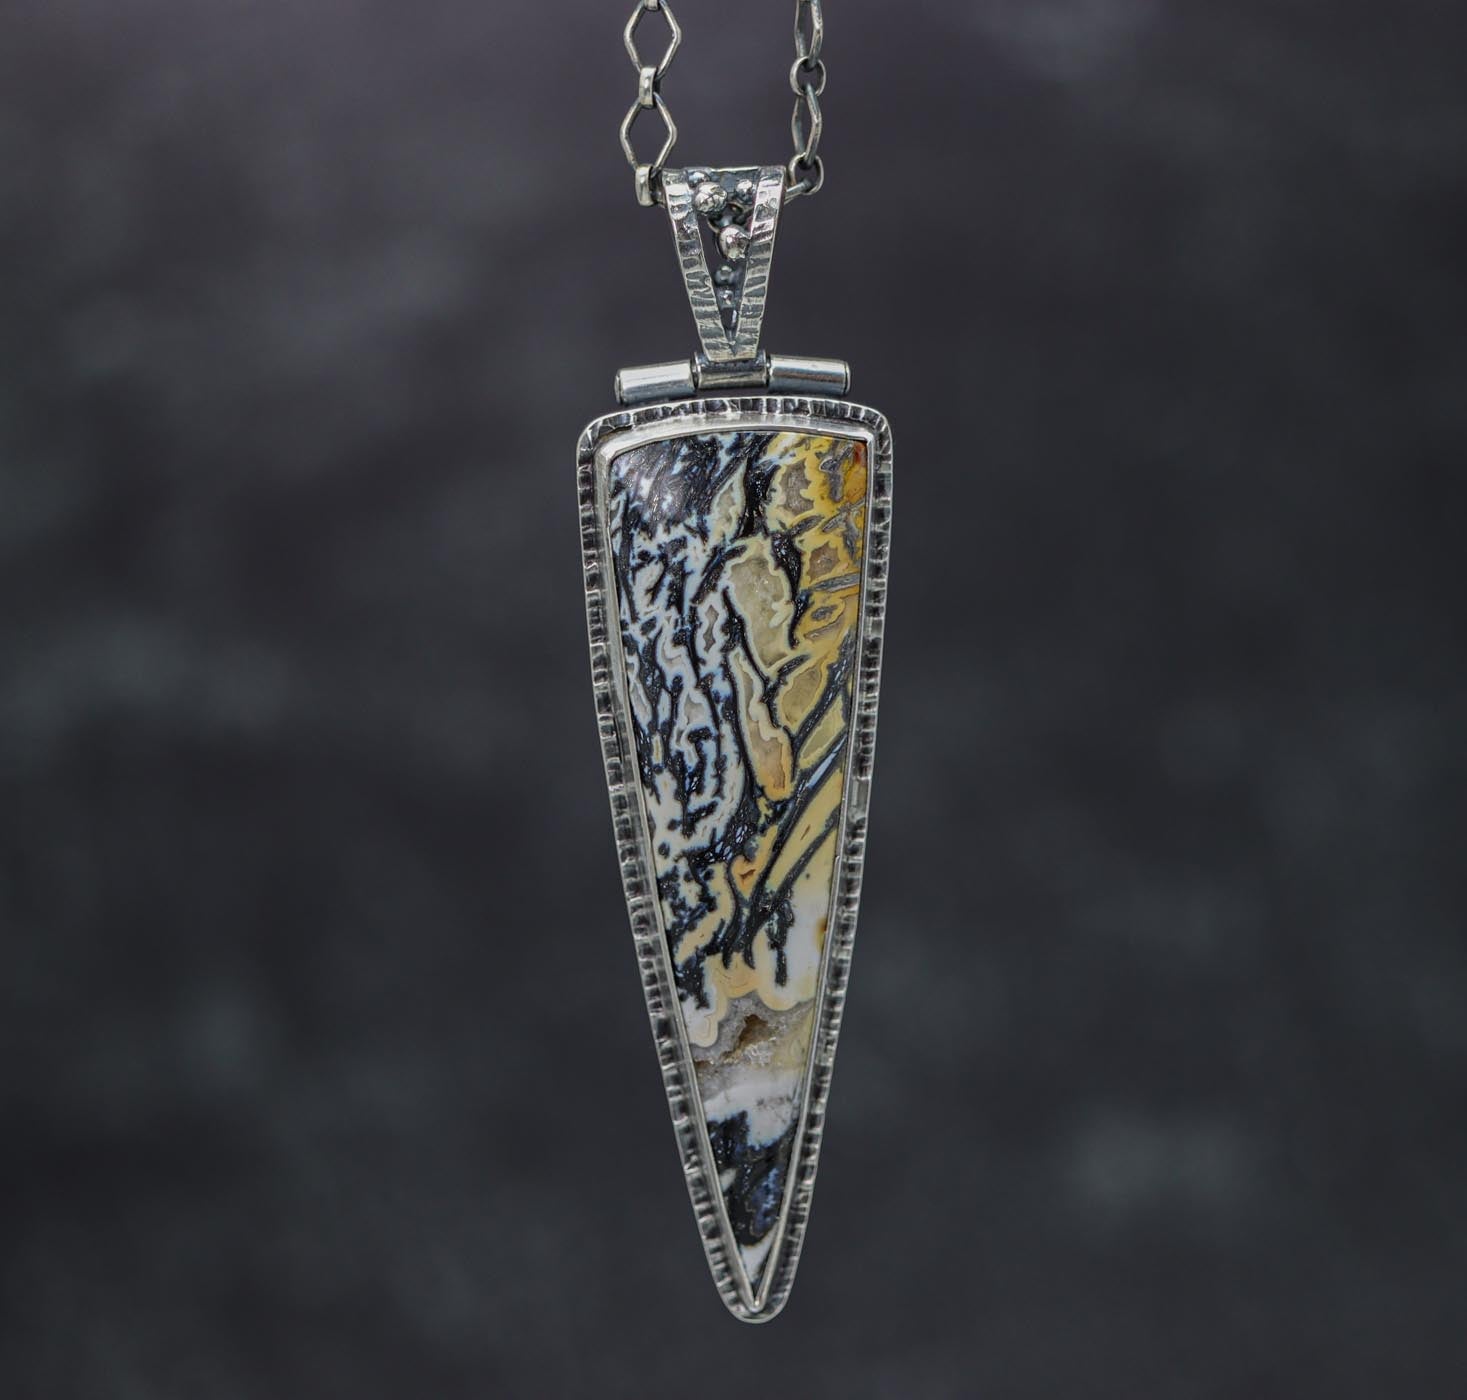 Wildcat Petrified Wood and Citrine Pendant Sterling Silver One Of a Kind Gemstone Necklace